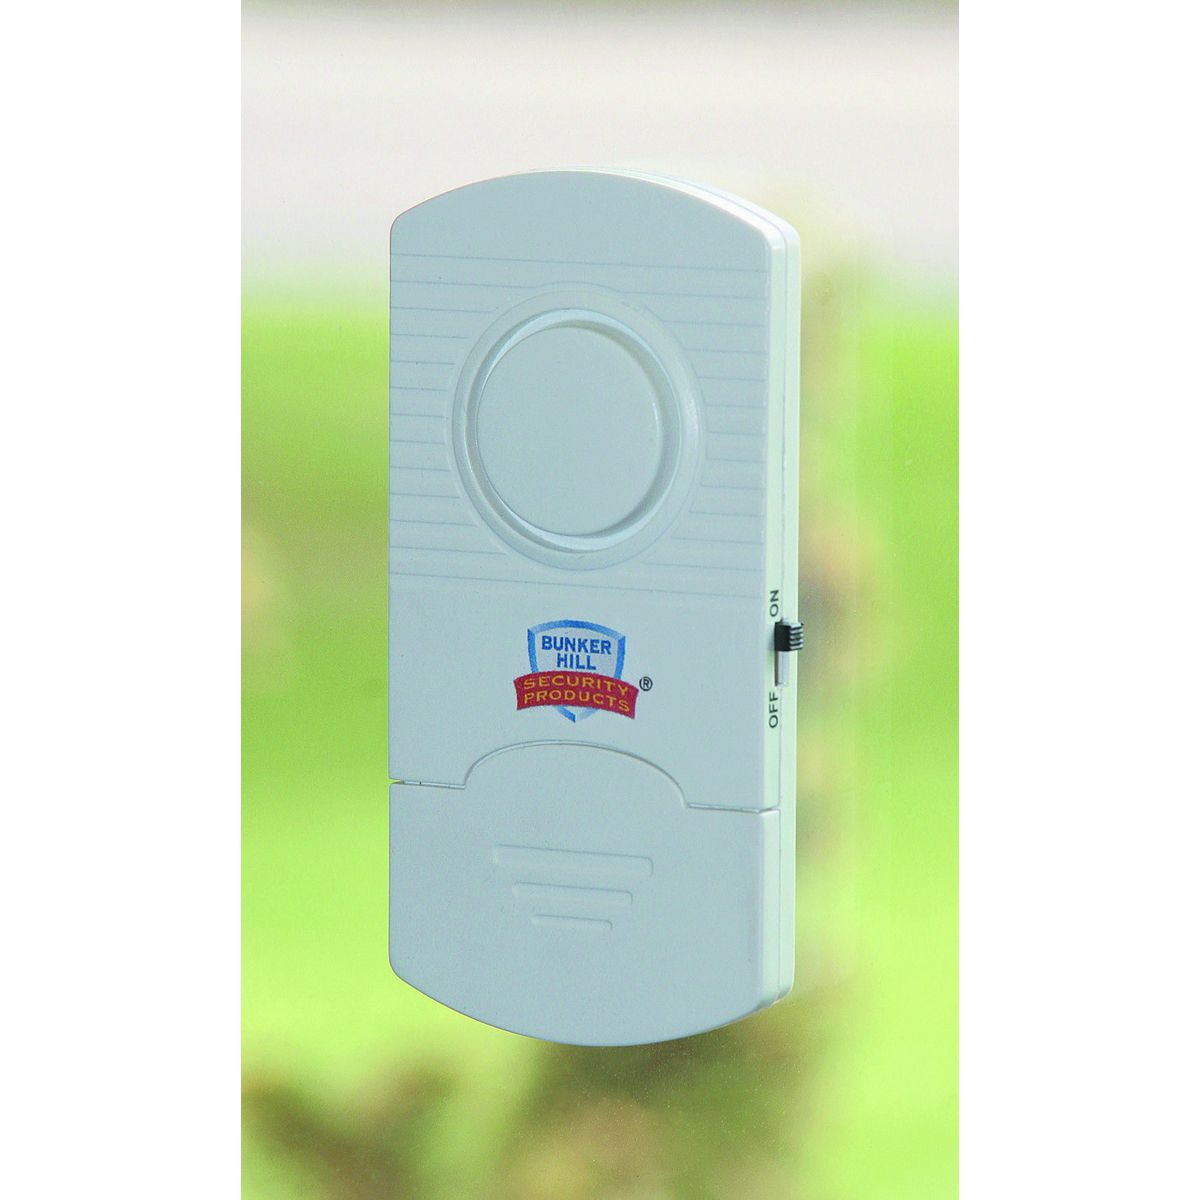 BUNKER HILL SECURITY Vibration Alarm Two Pack